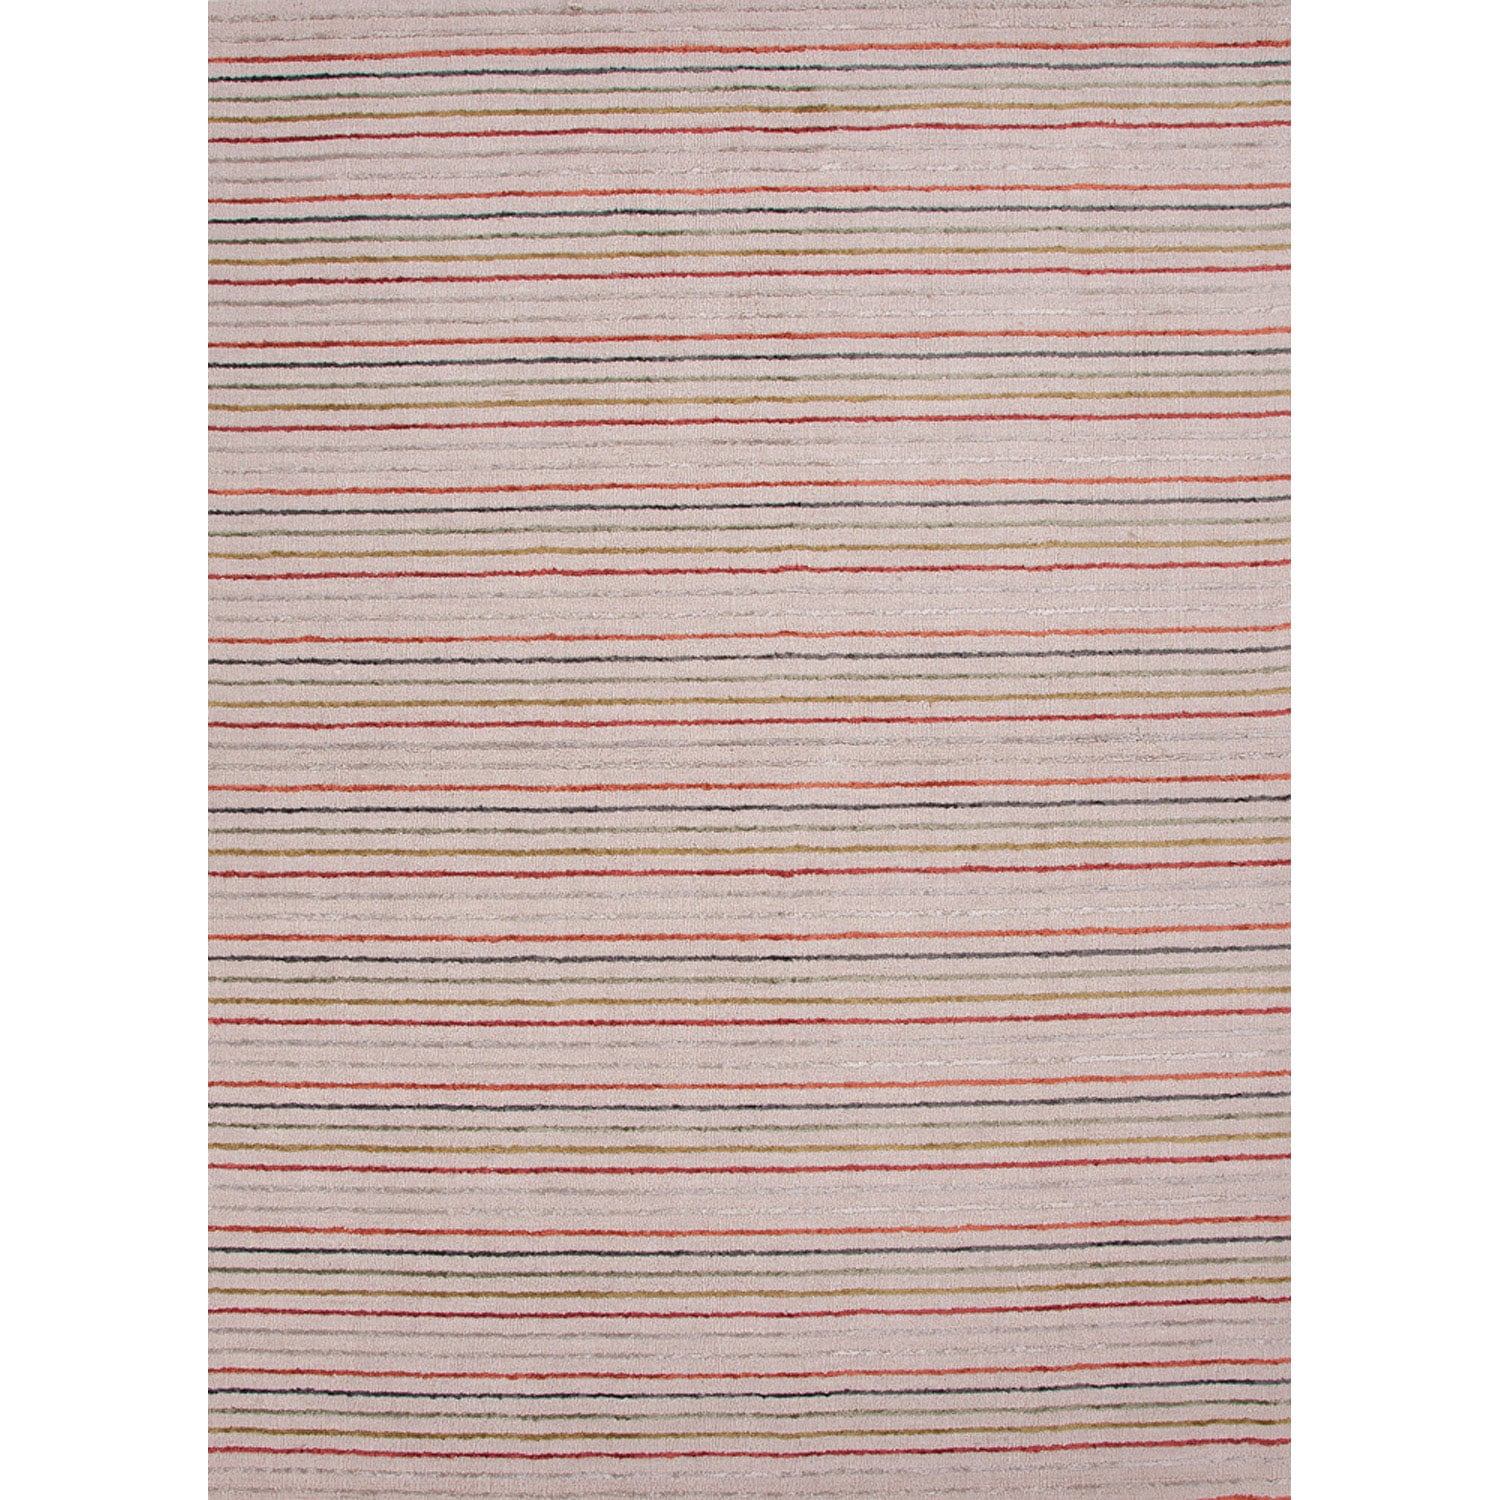 Hand loomed Transitional Stripe pattern Multicolored Area Rug (9 X 13)